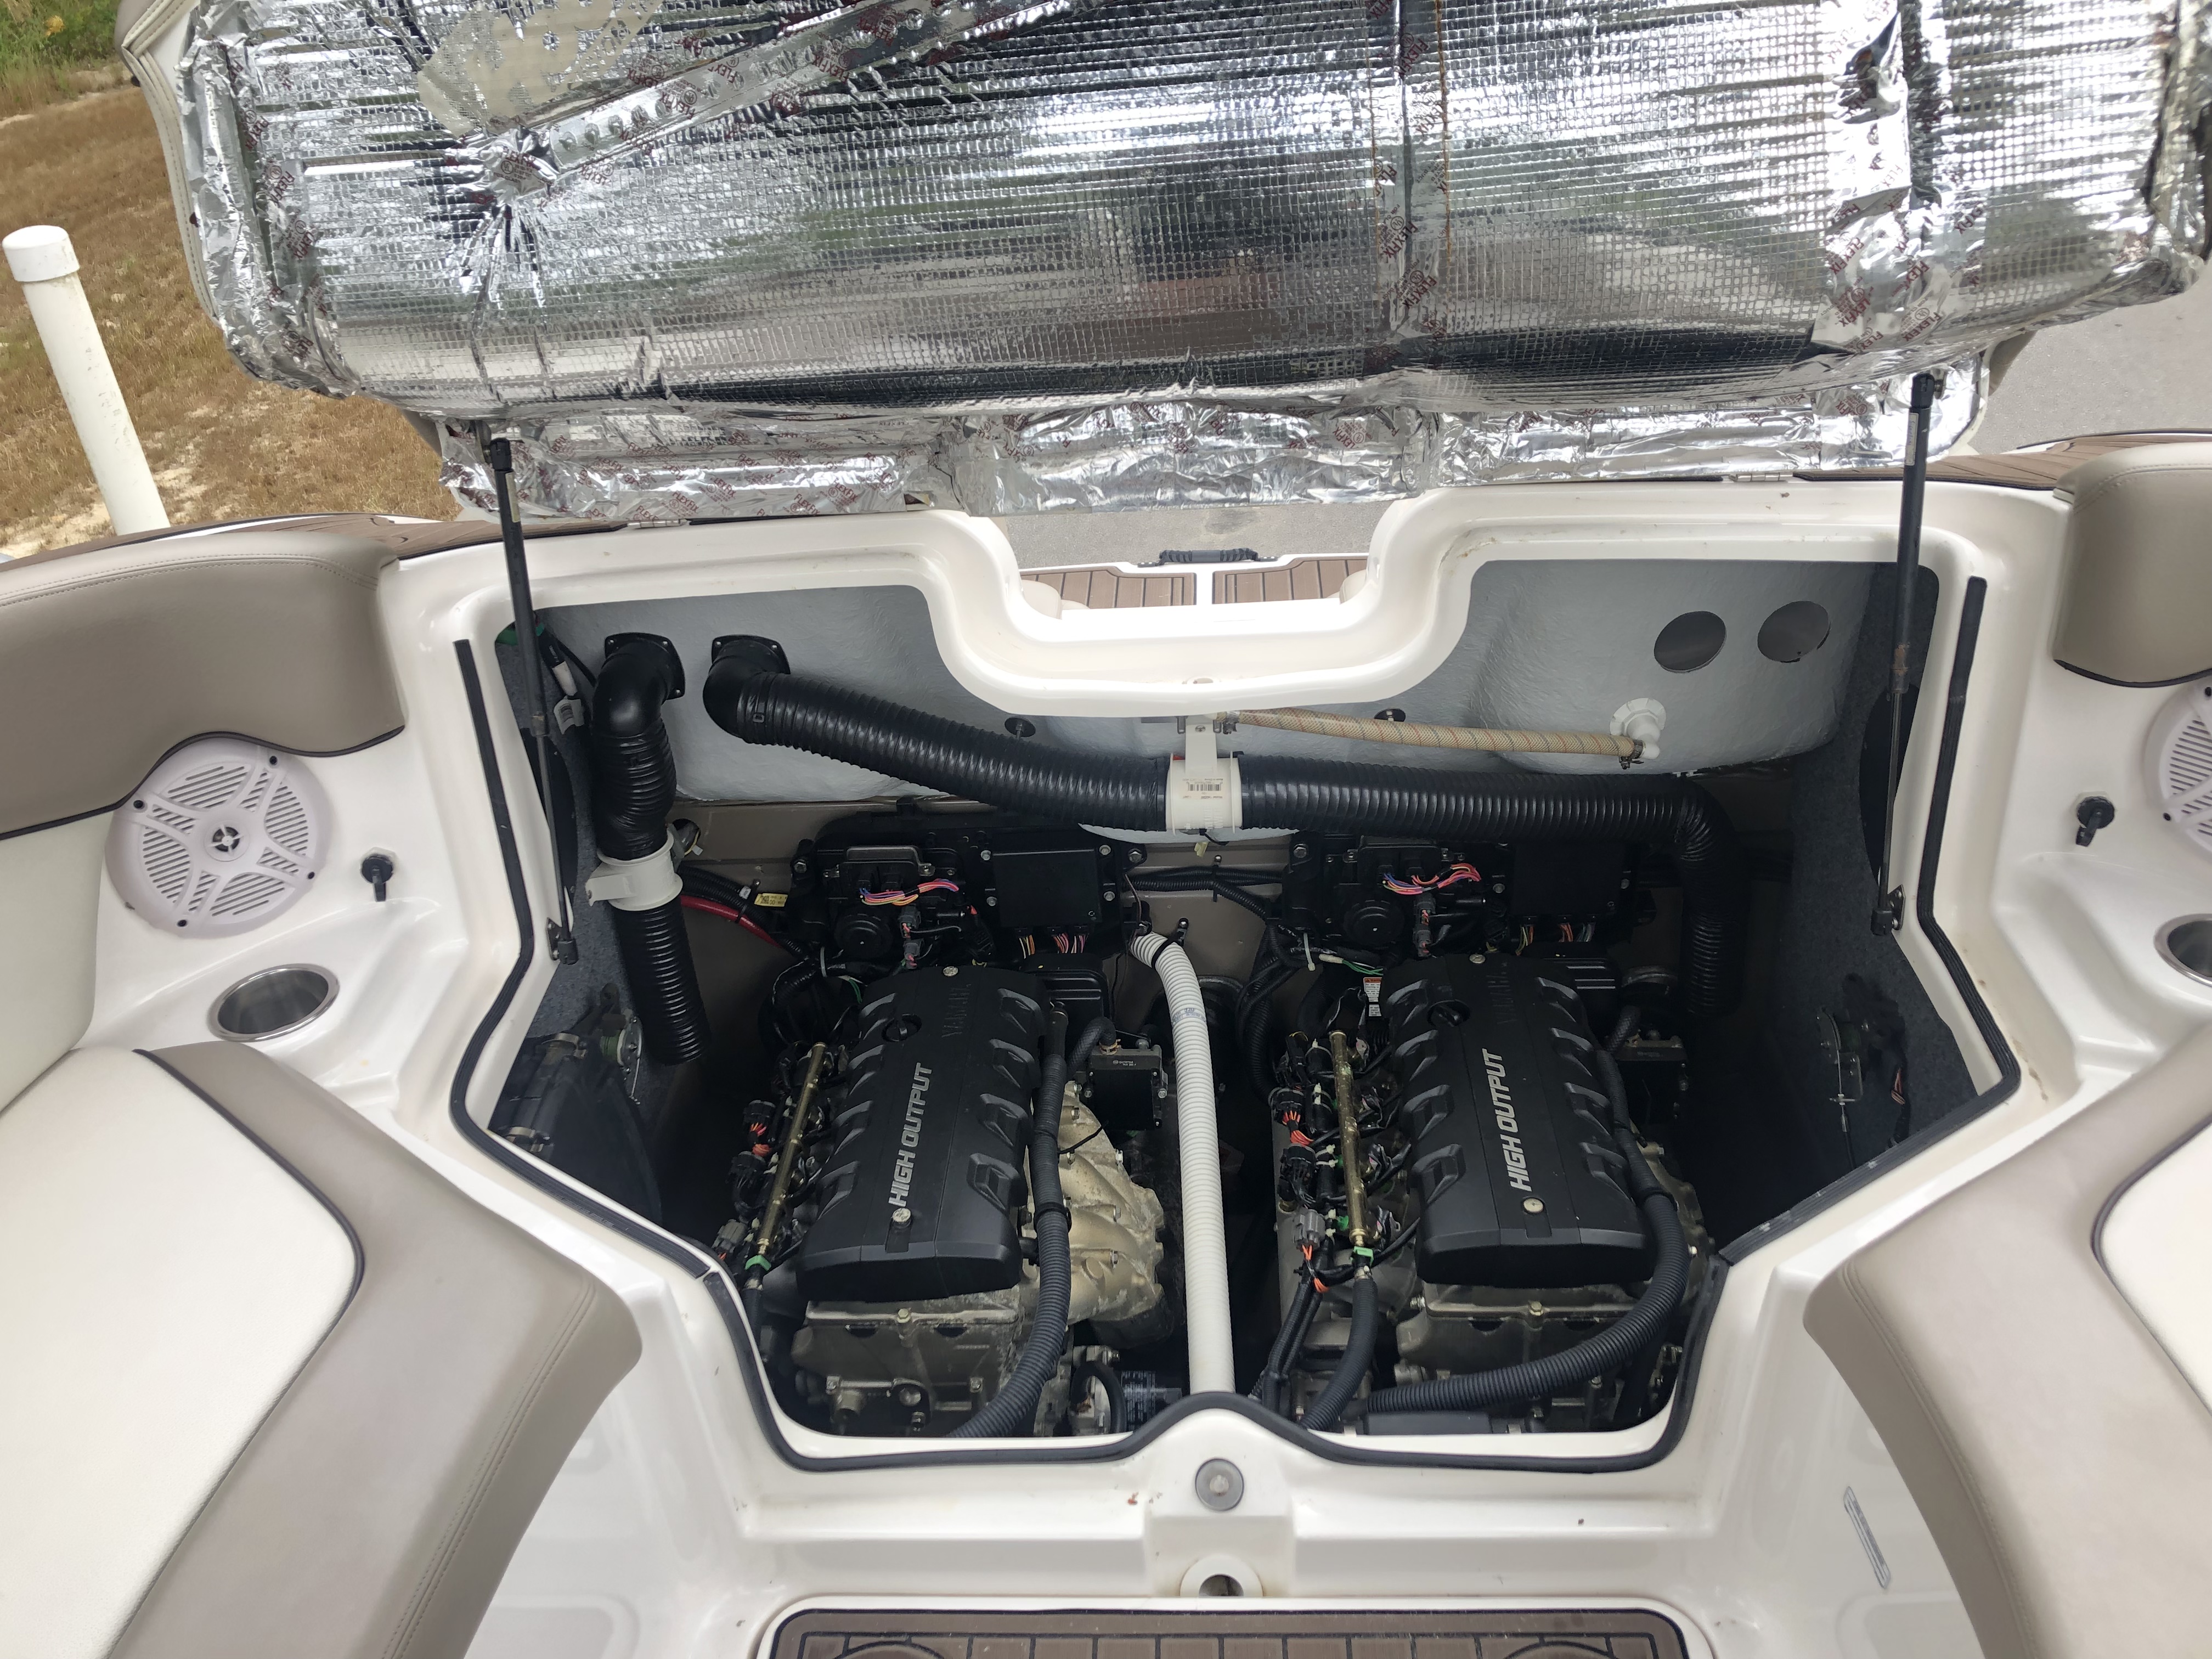 2010 Yamaha 242 Limited S , engine compartment with sound deadening lining